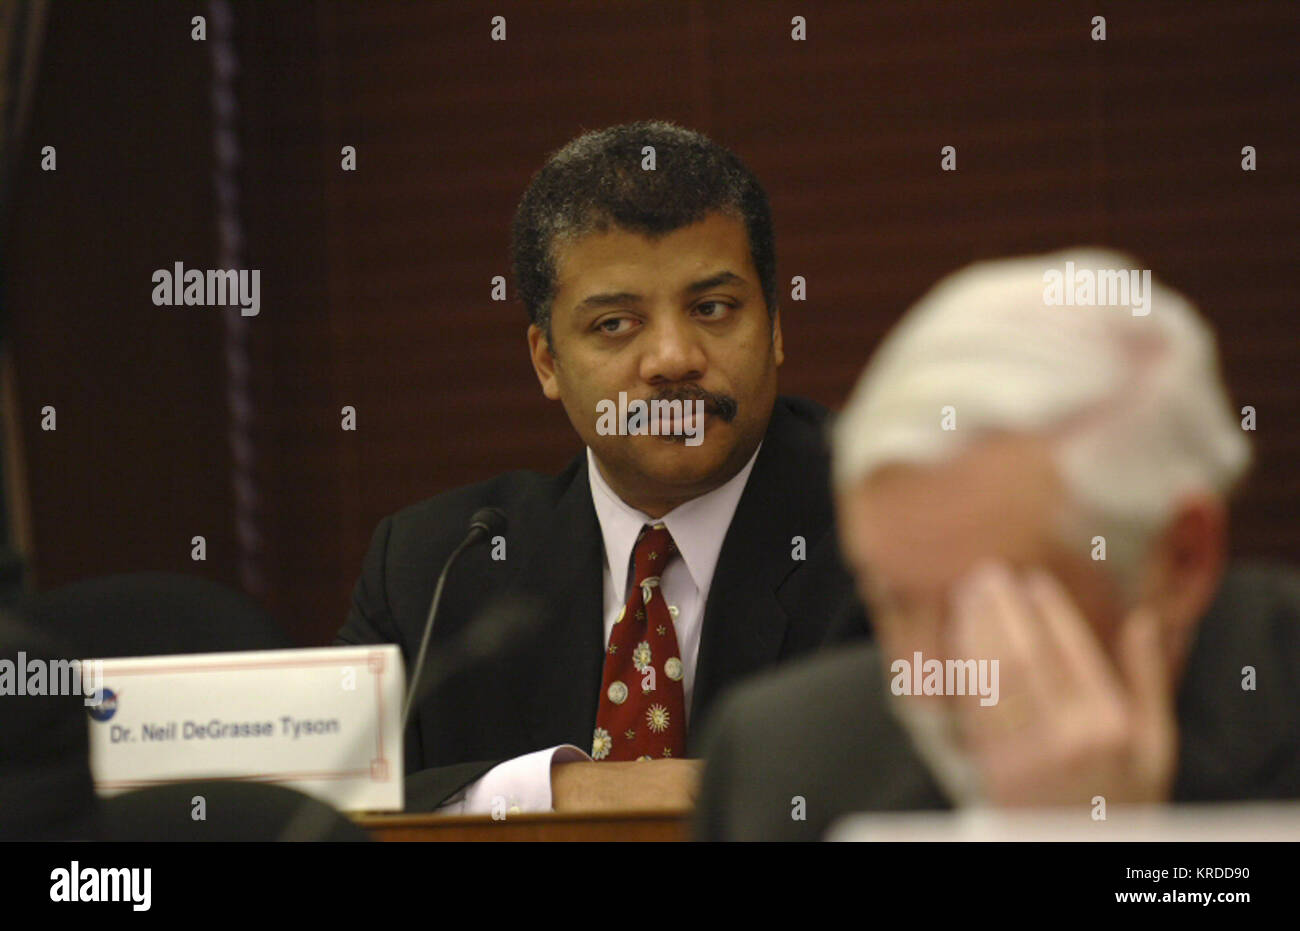 Dr. Neil DeGrasse Tyson, NASA advisory Council member listens during a meeting of the council at the Rayburn Building on Capitol Hill.  The NASA Advisory Council will be chaired by former Senator and Apollo astronaut Harrison H. 'Jack' Schmitt. Former Apollo 11 astronaut Neil Armstrong joins Schmitt as one of the distinguished experts on the council, along with Gen. Lester L. Lyles, USAF (Ret.), former commander, Air Force Materiel Command, Wright-Patterson Air Force Base, Ohio, and Dr. Charles F. Kennel, director, Scripps Institute of Oceanography.  Photo Credit: 'NASA/Bill Ingalls' Neil deGr Stock Photo